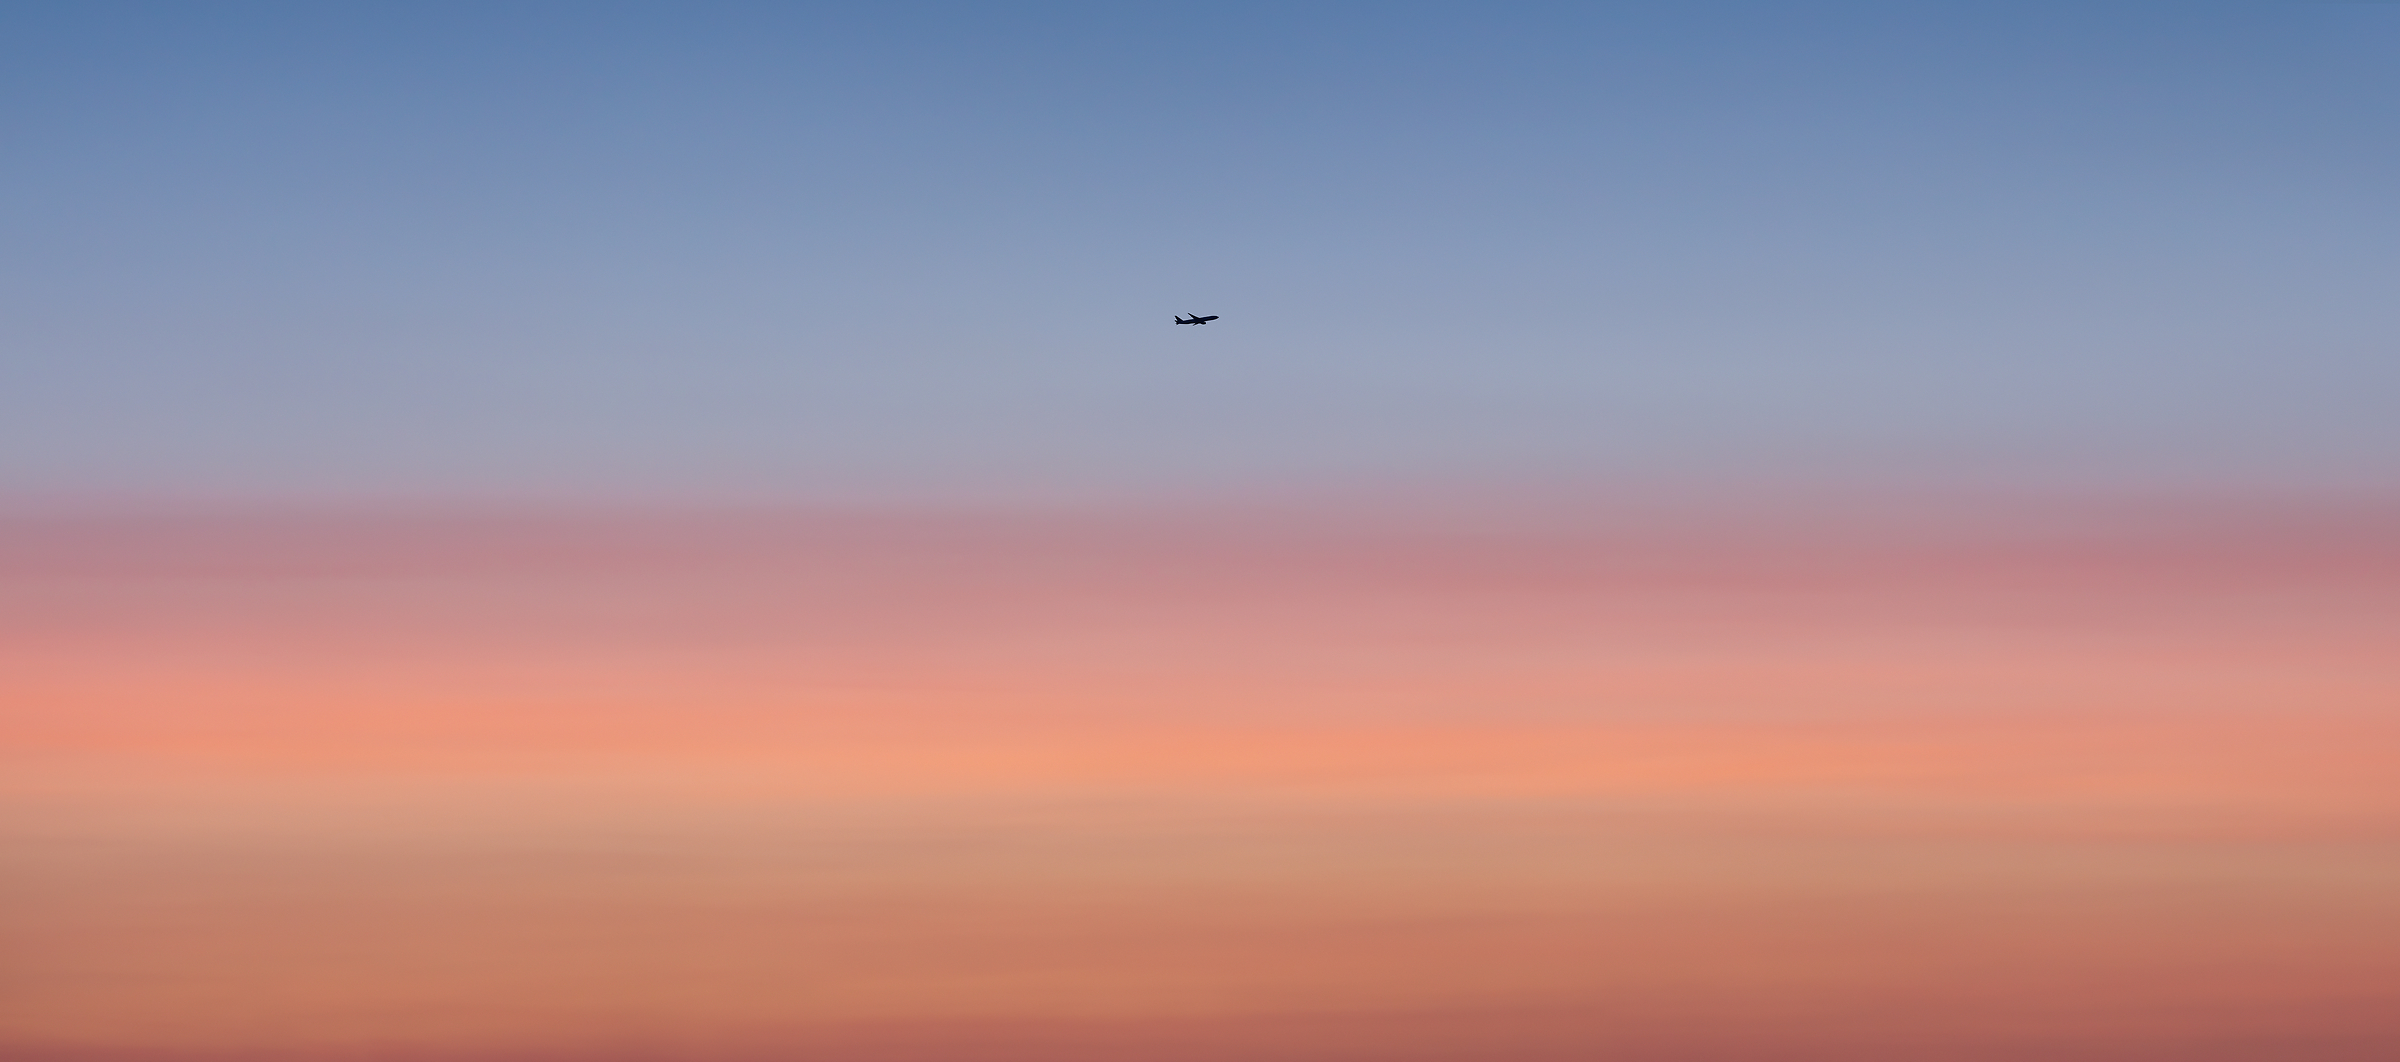 452 megapixels! A very high resolution, large-format VAST photo of an airplane taking off or landing in a vibrant, pastel, colorful sunset; fine art airplane photograph created by Dan Piech in New York City